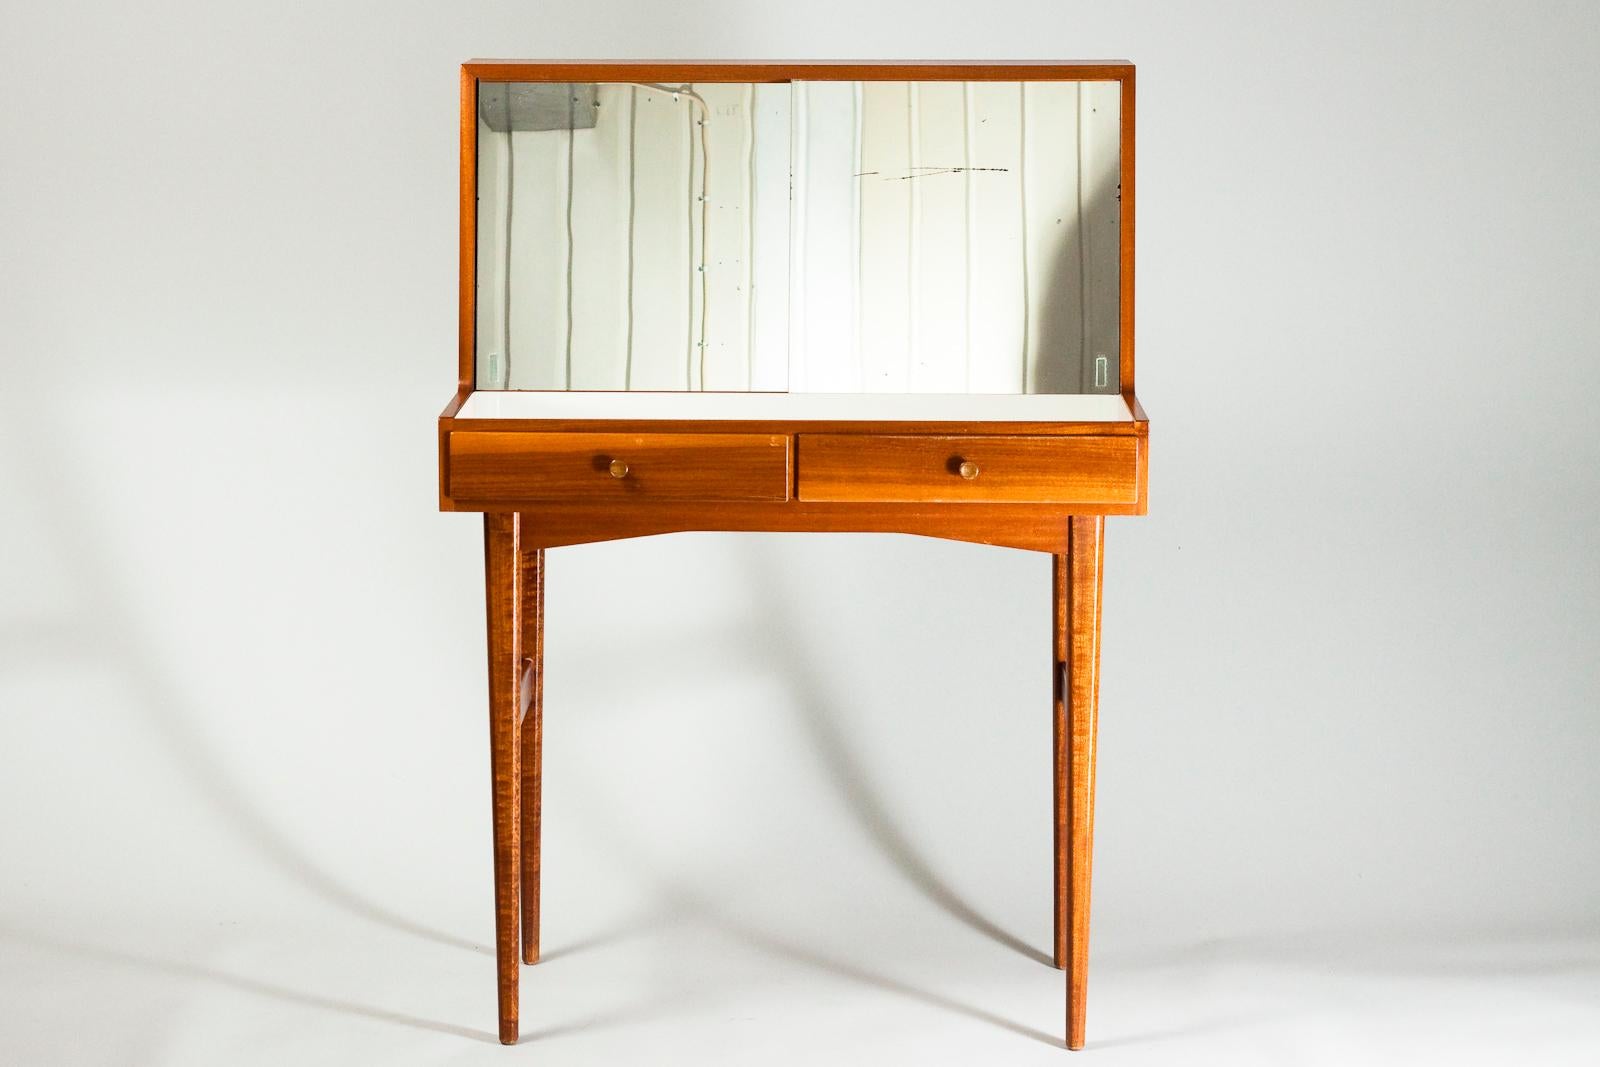 Rare Mid-Century Modern Finnish dressing table designed by Olof Ottelin for Oy Stockmann Ab in the 1950s. The condition is very good and only some scratches in the mirror can be found. In the Drawer there is a special compartment for make-up. Behind